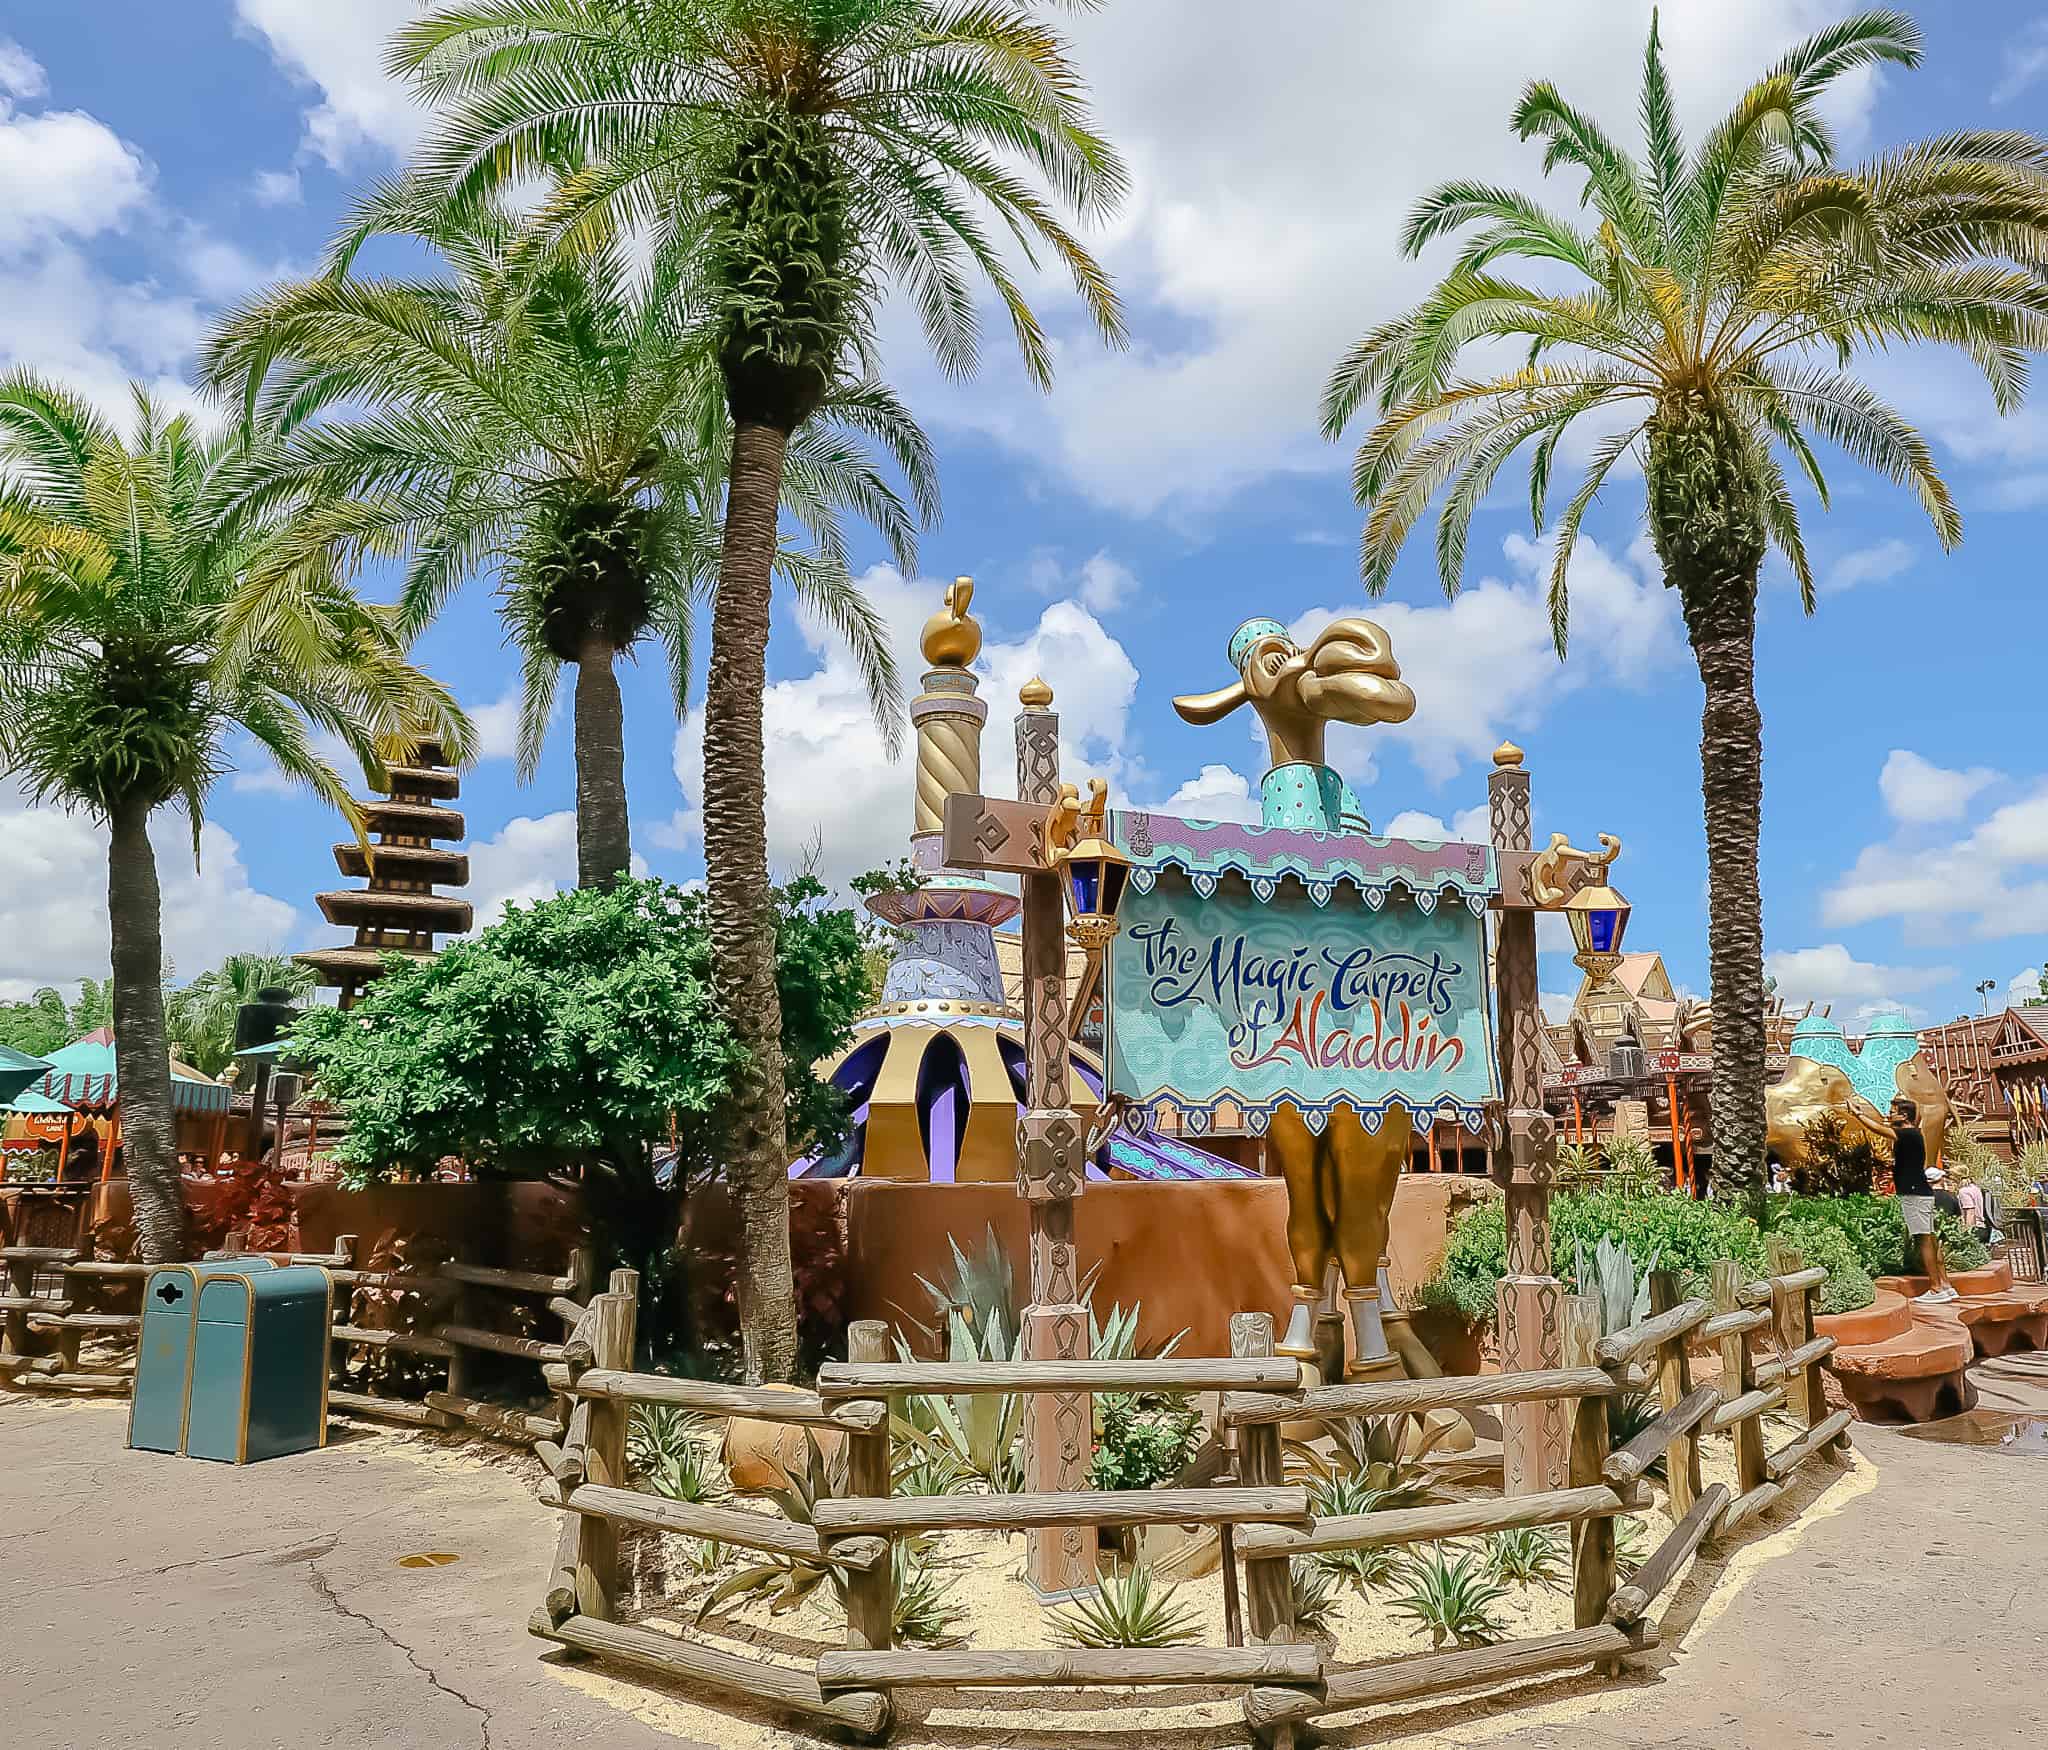 A sign that reads "The Magic Carpets of Aladdin" in front of the attraction. 